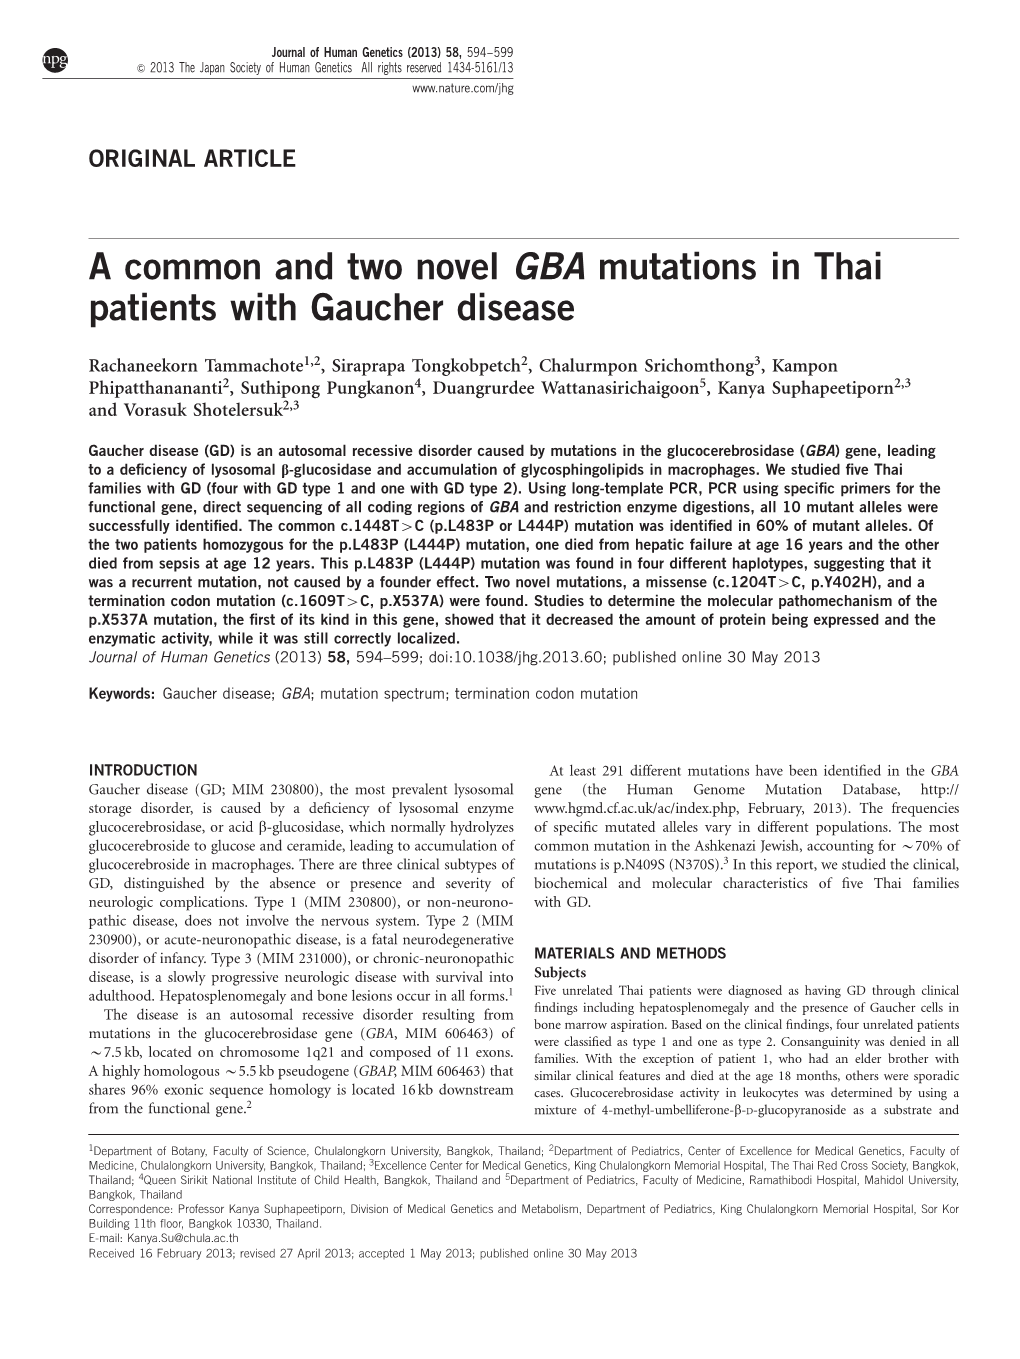 A Common and Two Novel GBA Mutations in Thai Patients with Gaucher Disease